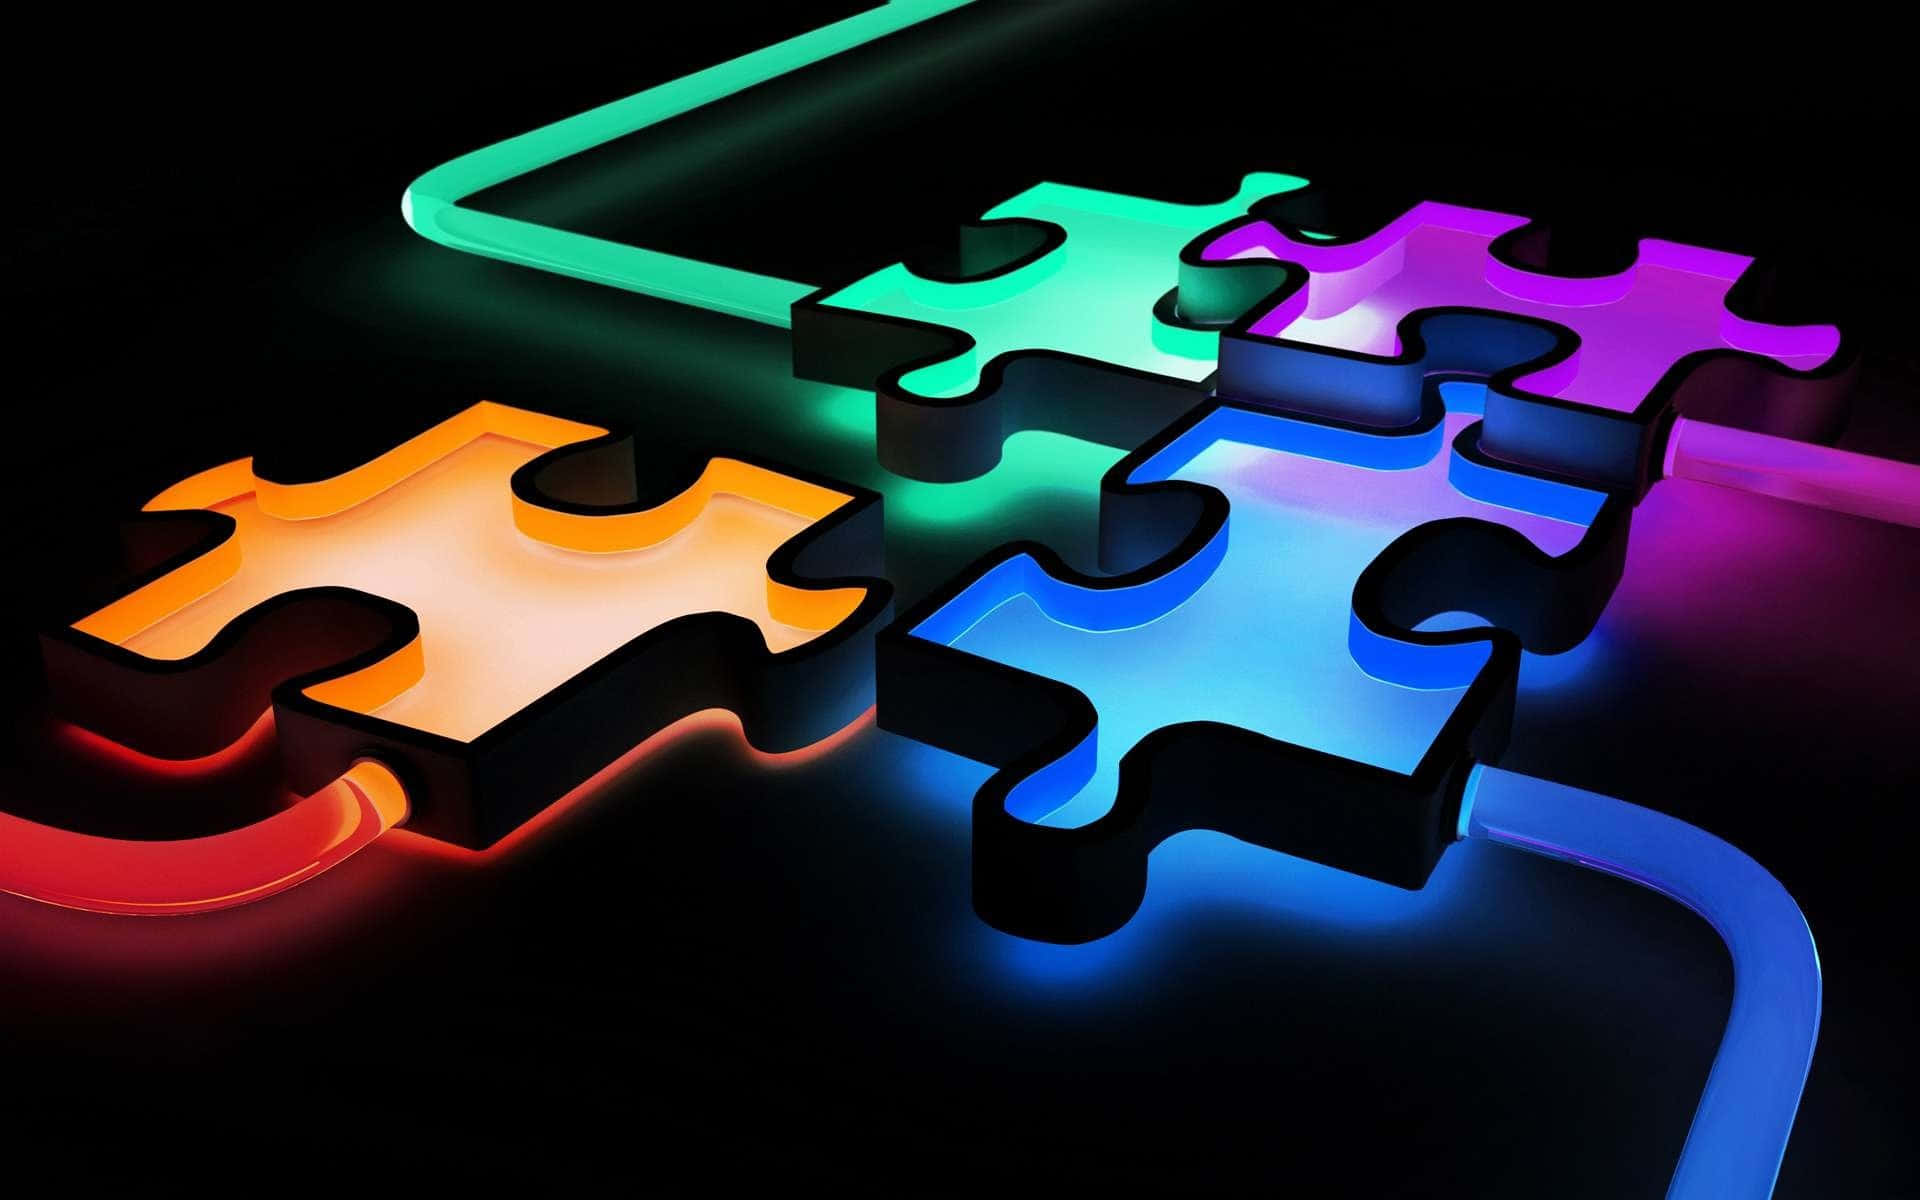 A Colorful Puzzle Piece Is Placed On A Black Background